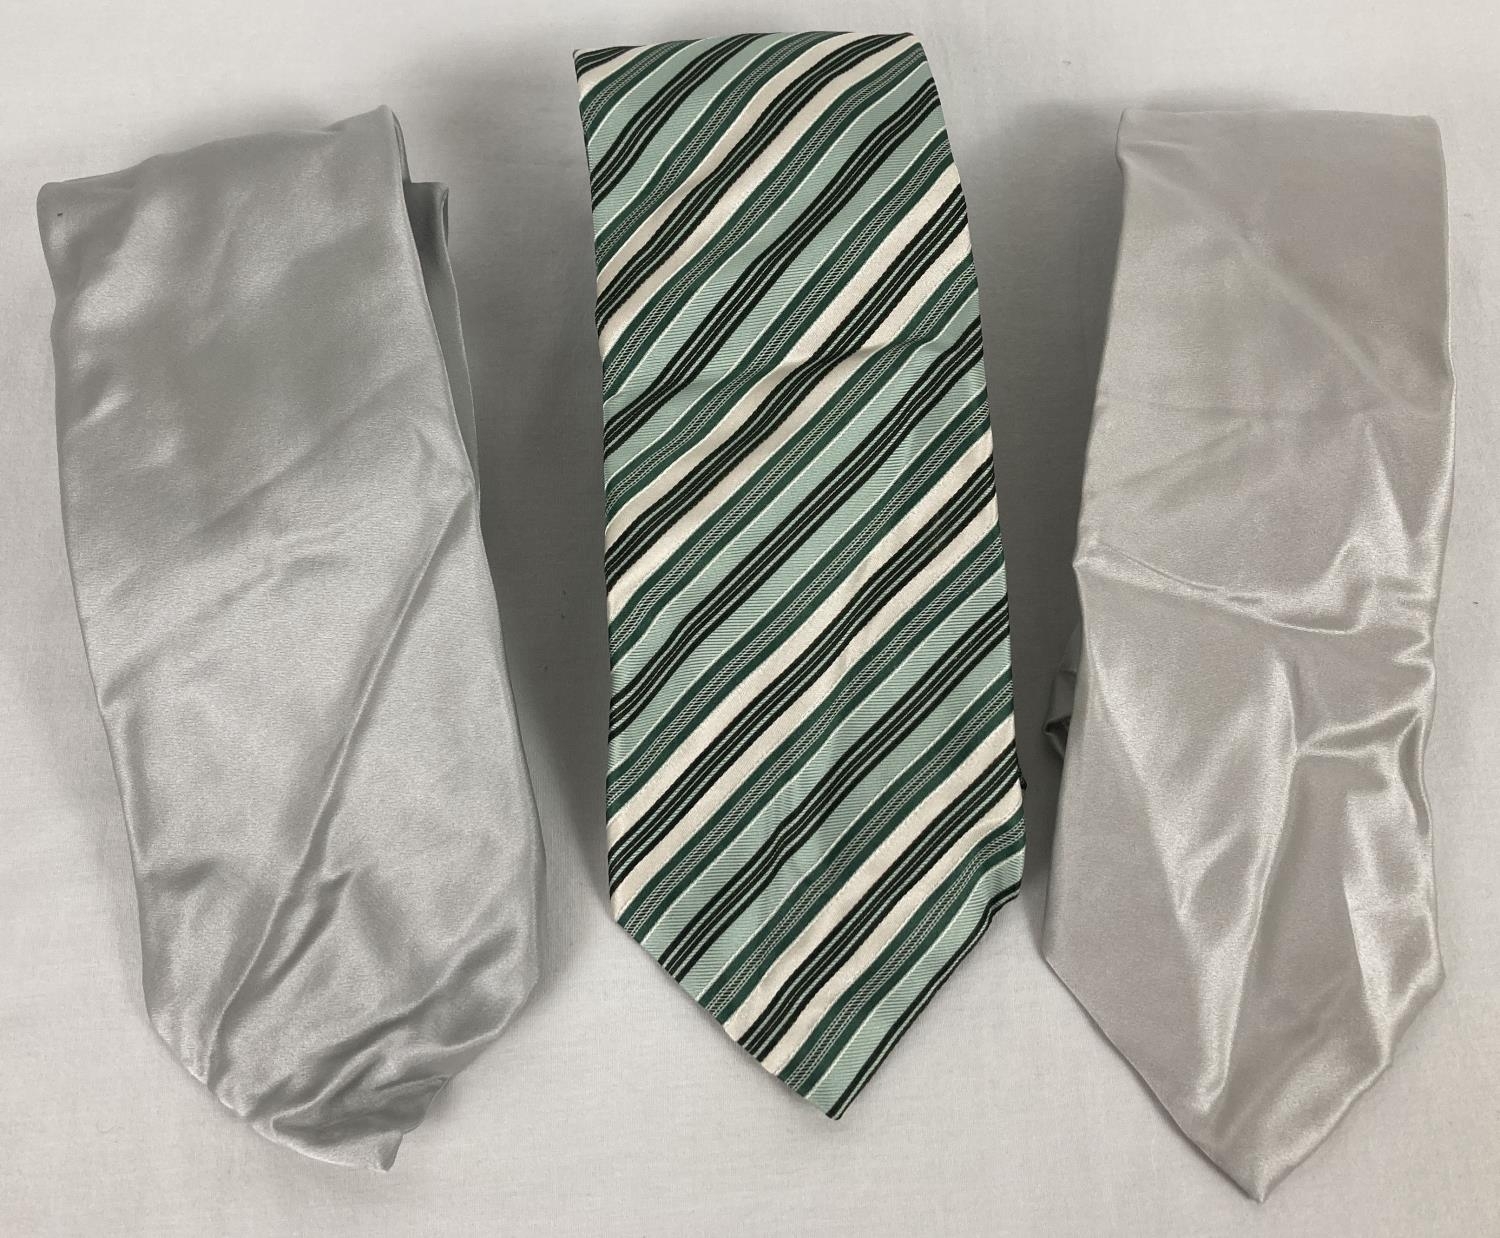 3 vintage Brioni men's silk ties. 2 in plain natural colours and a striped green tie.